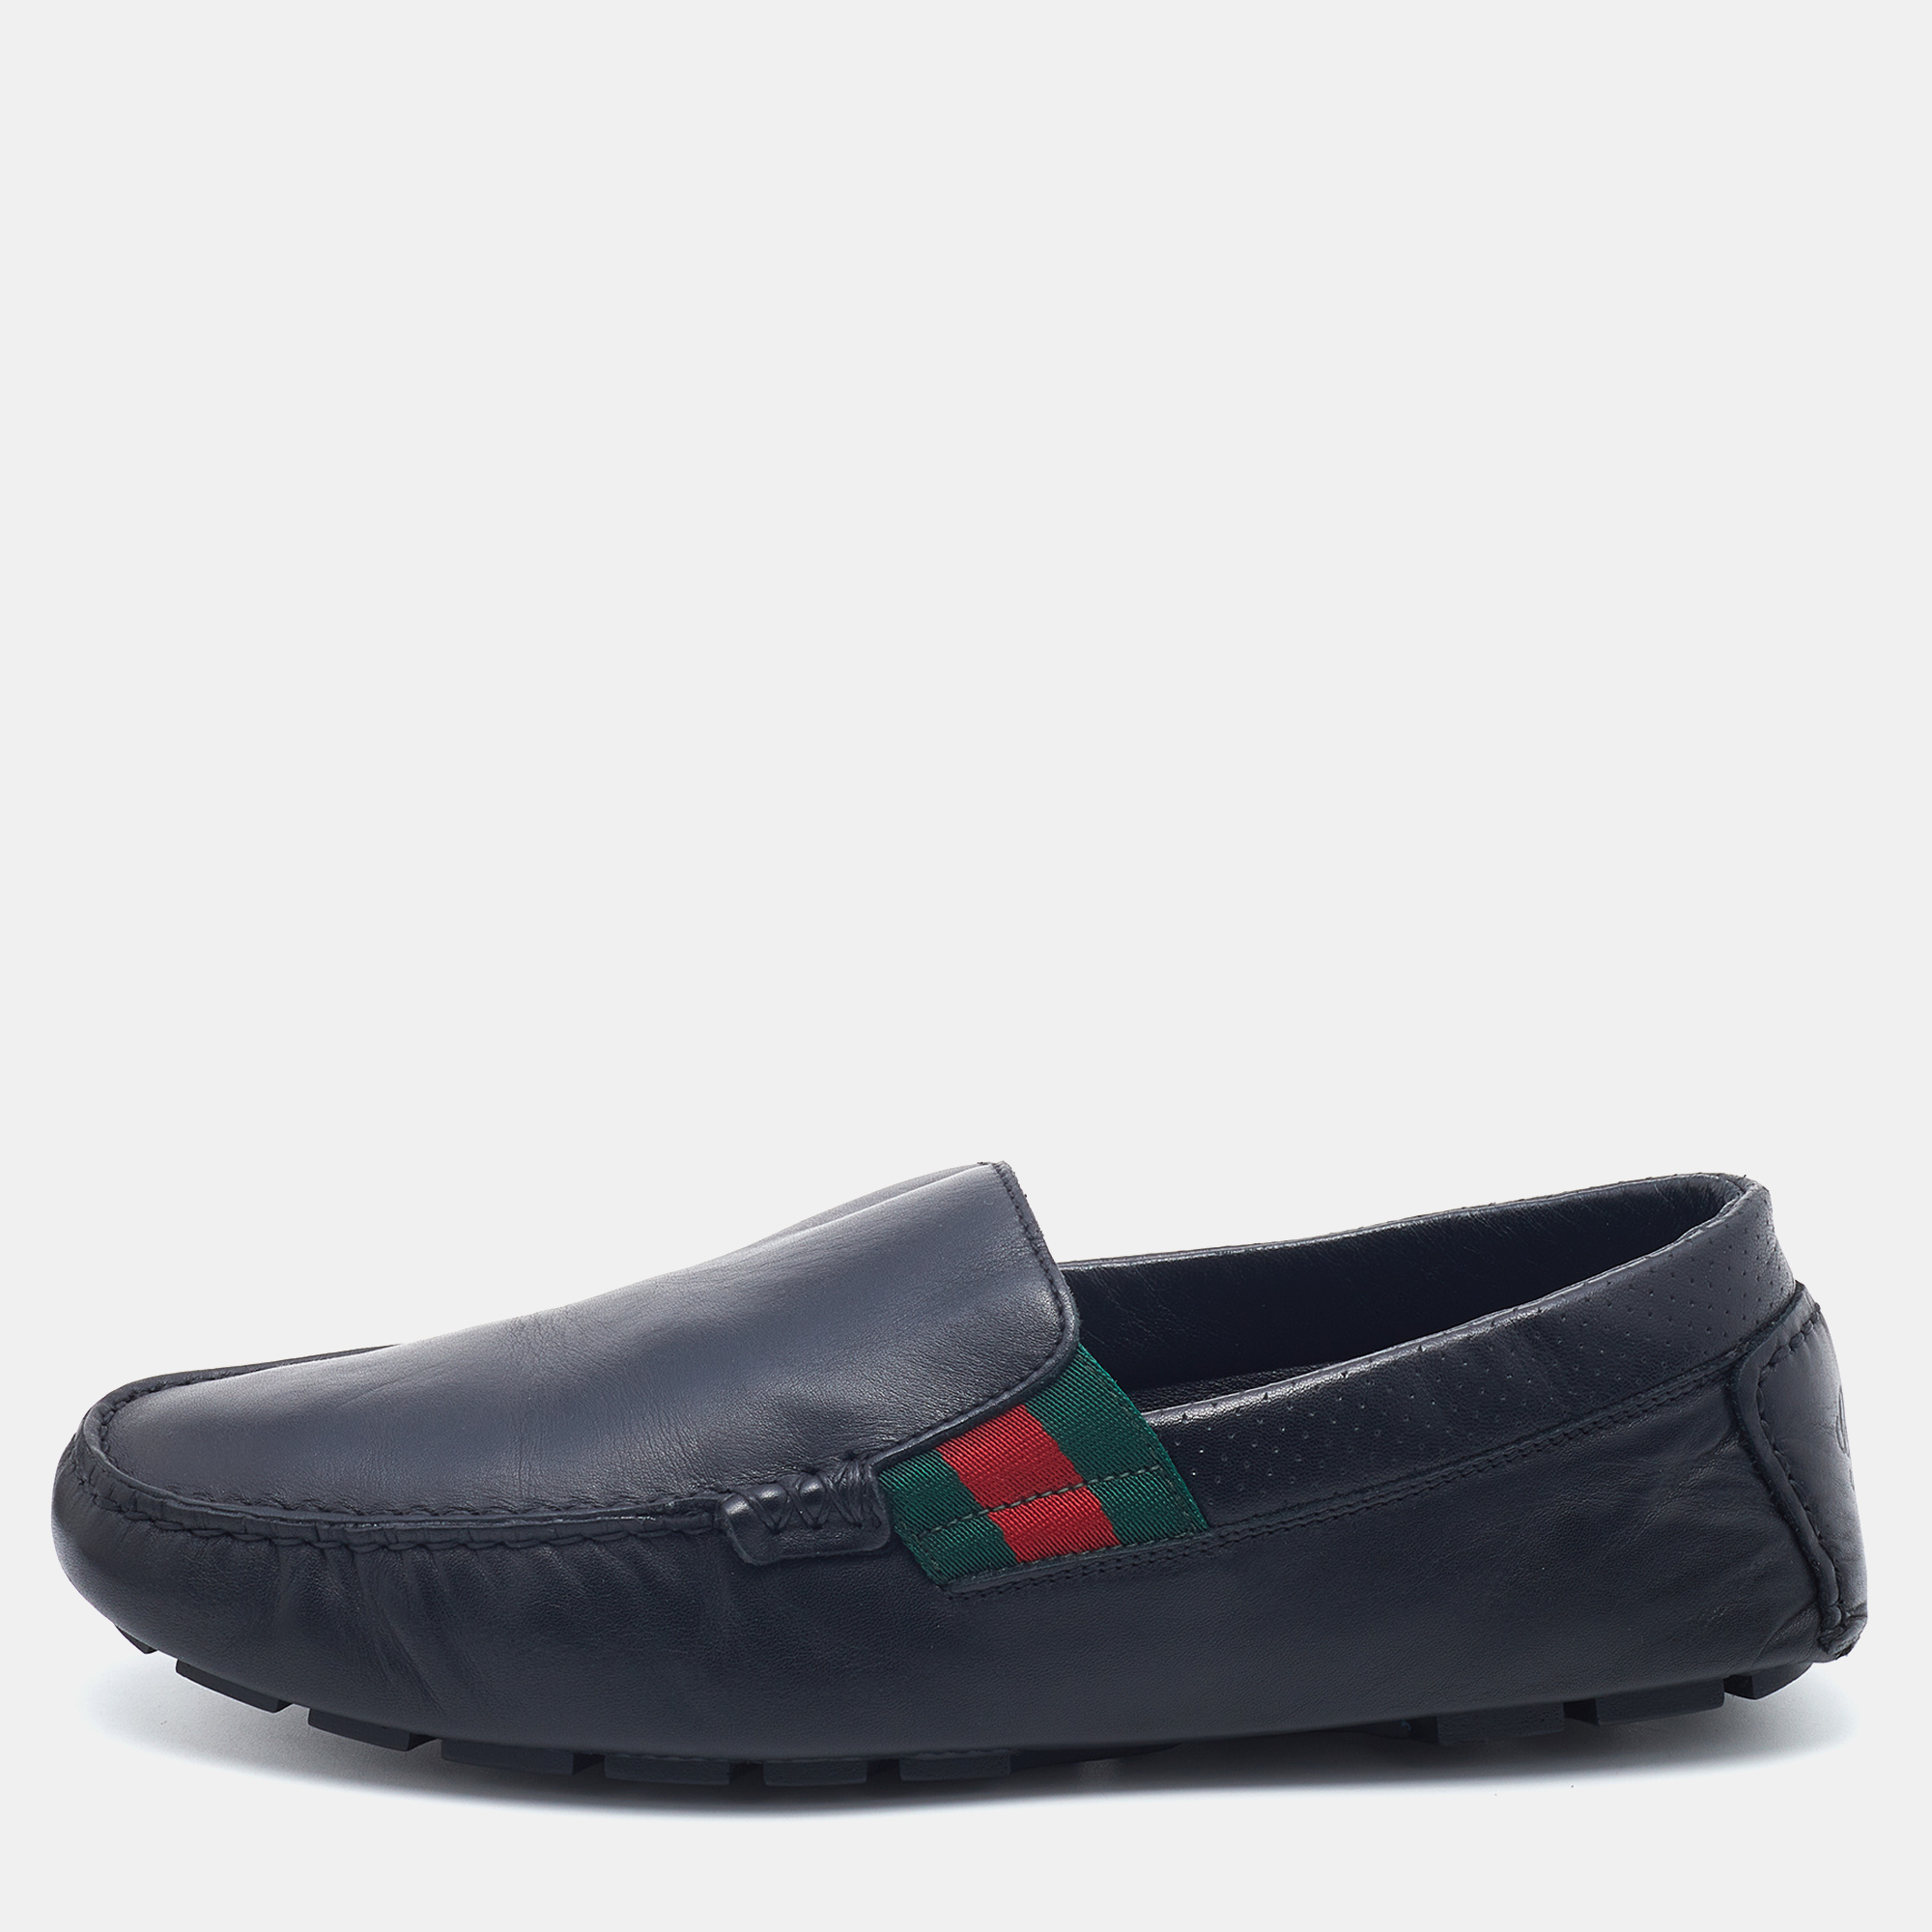 Gucci black leather web slip on loafers size 41.5